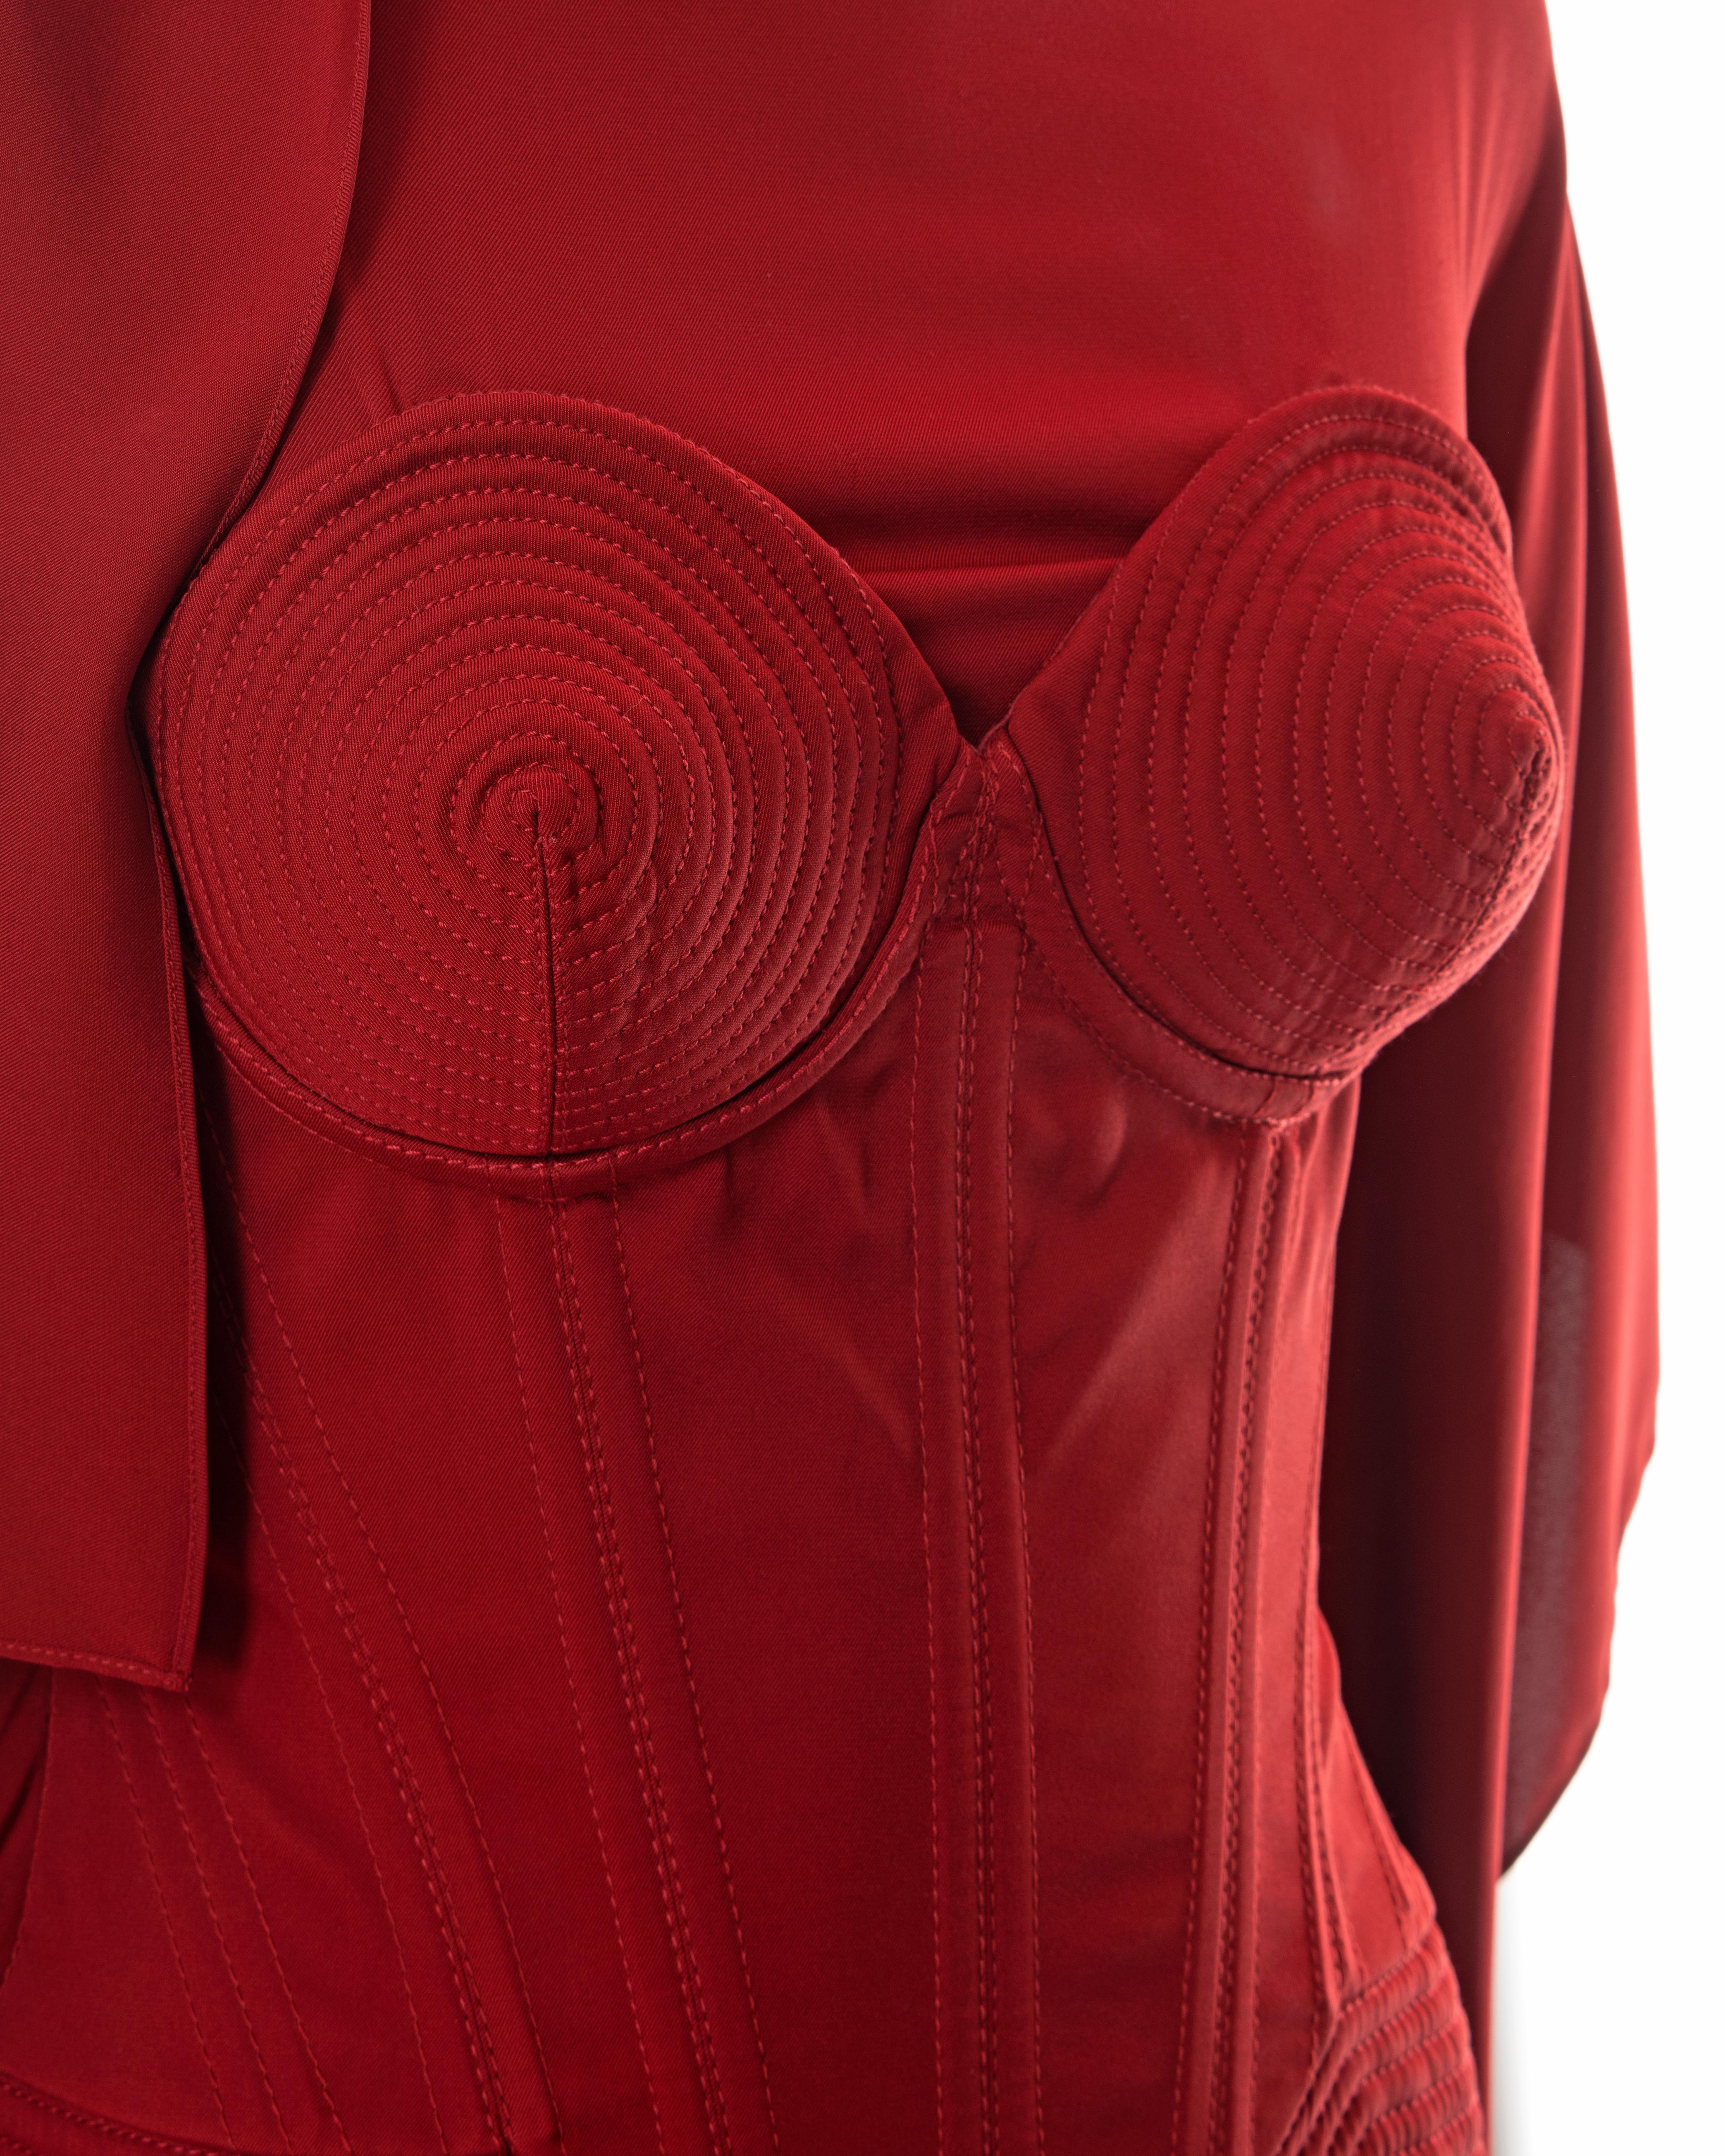 Jean Paul Gaultier red silk dress with built-in cone bra and corset, fw 2010 1